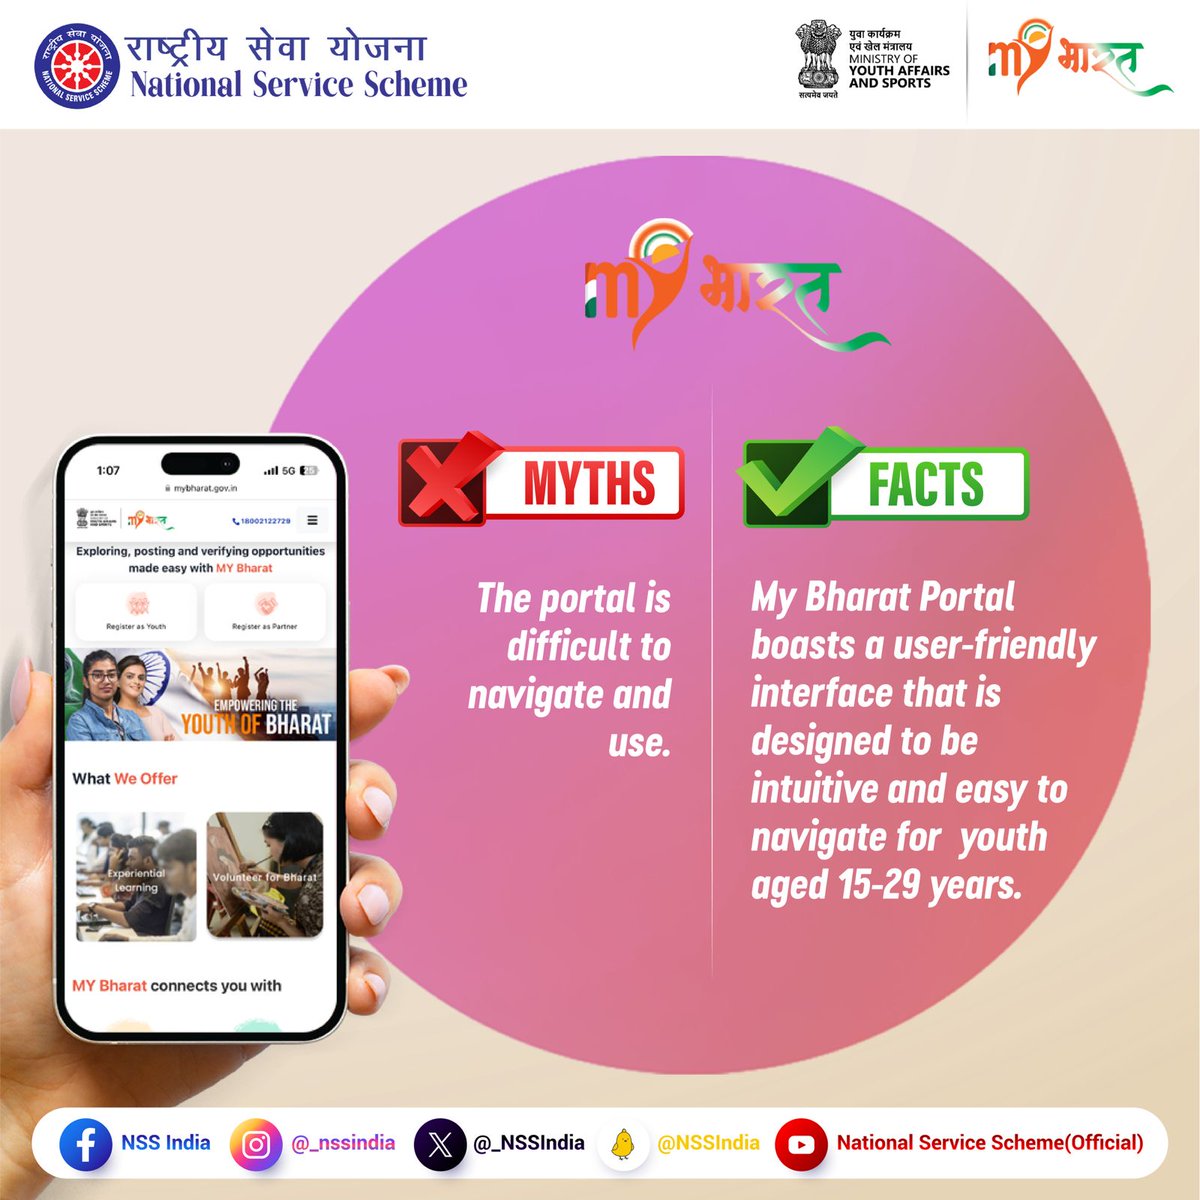 MyBharat portal is your gateway to ease and accessibility. It's time to explore opportunities the smart way. Register on mybharat.gov.in today! #mybharat #mybharatregistration